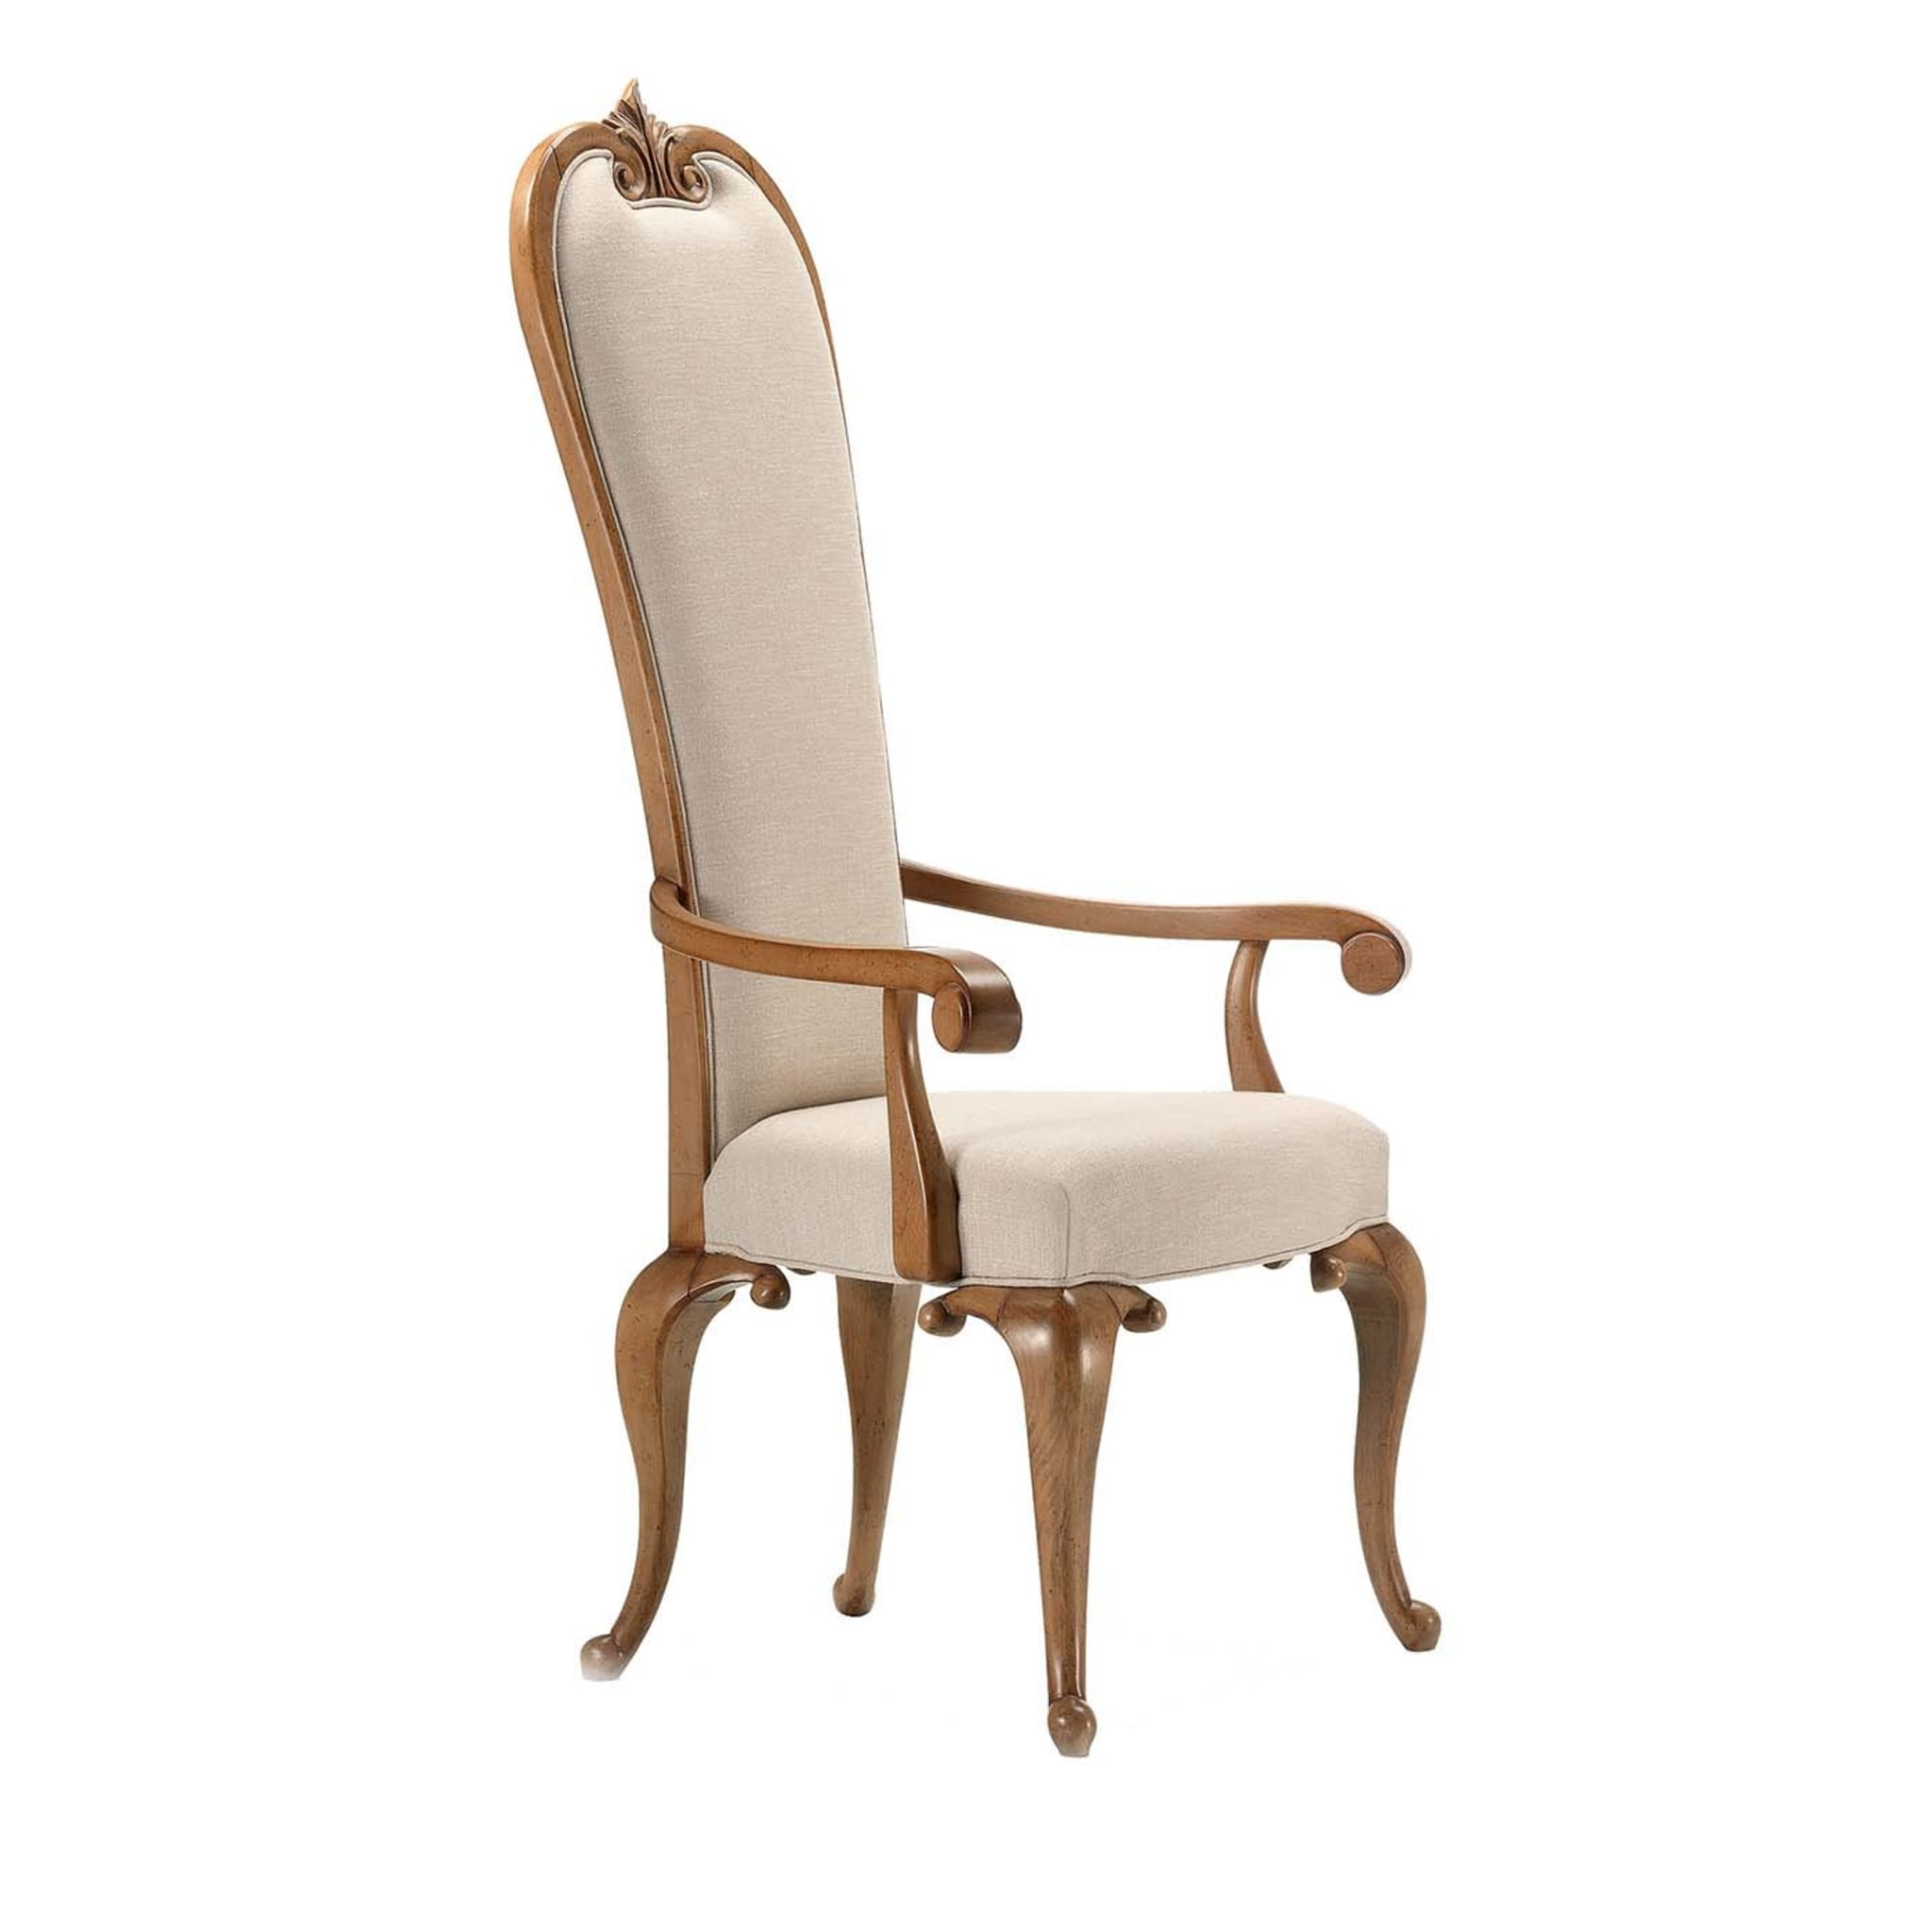 Cabriole Chair with Armrests - Main view